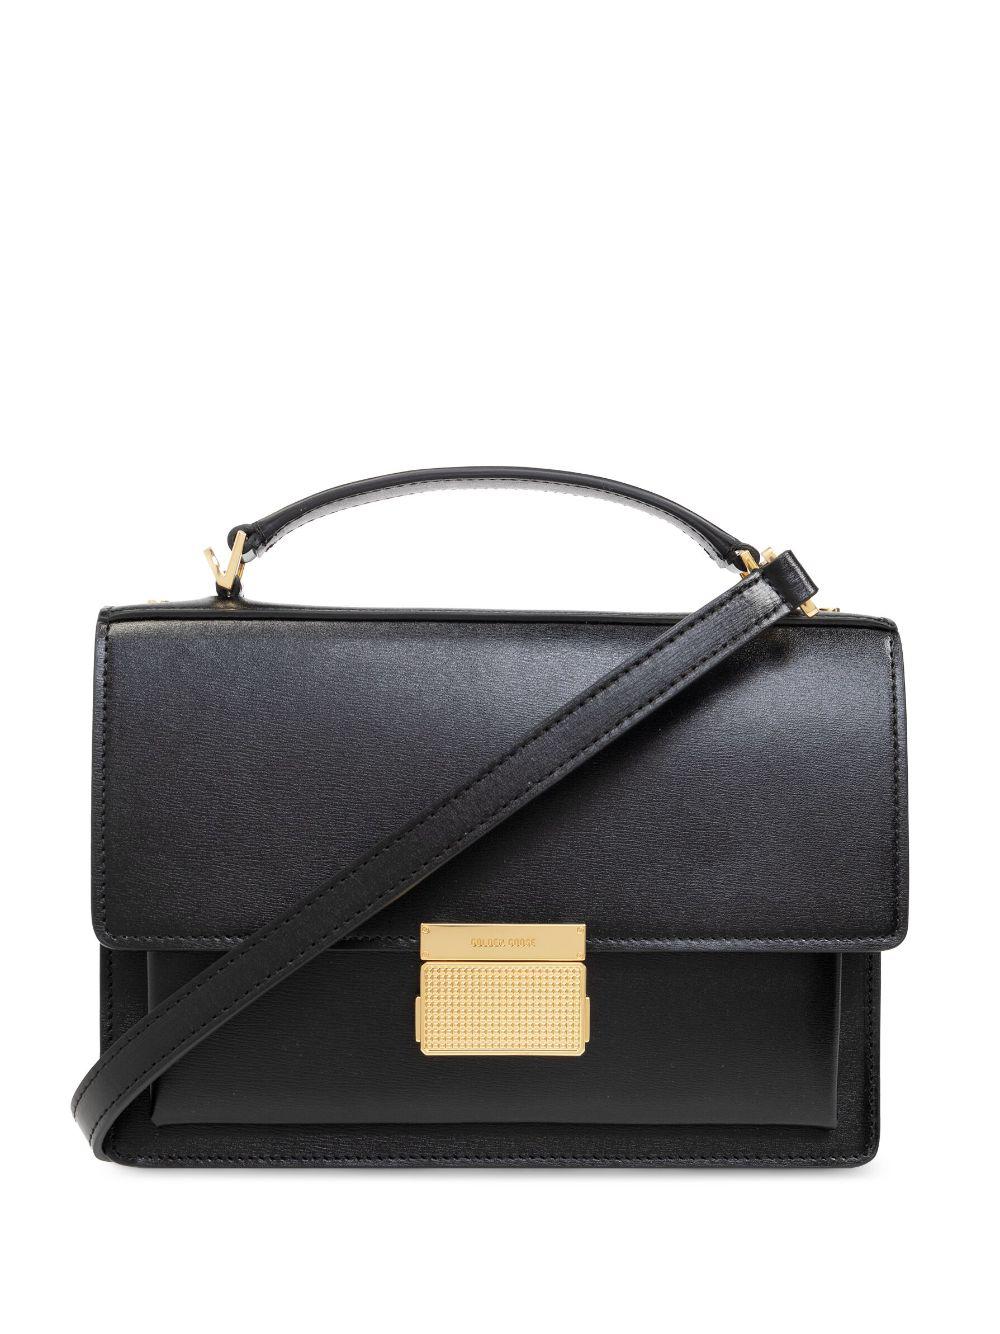 GOLDEN GOOSE Luxurious Black Leather Handbag for Women: Perfect for Fall/Winter 2024